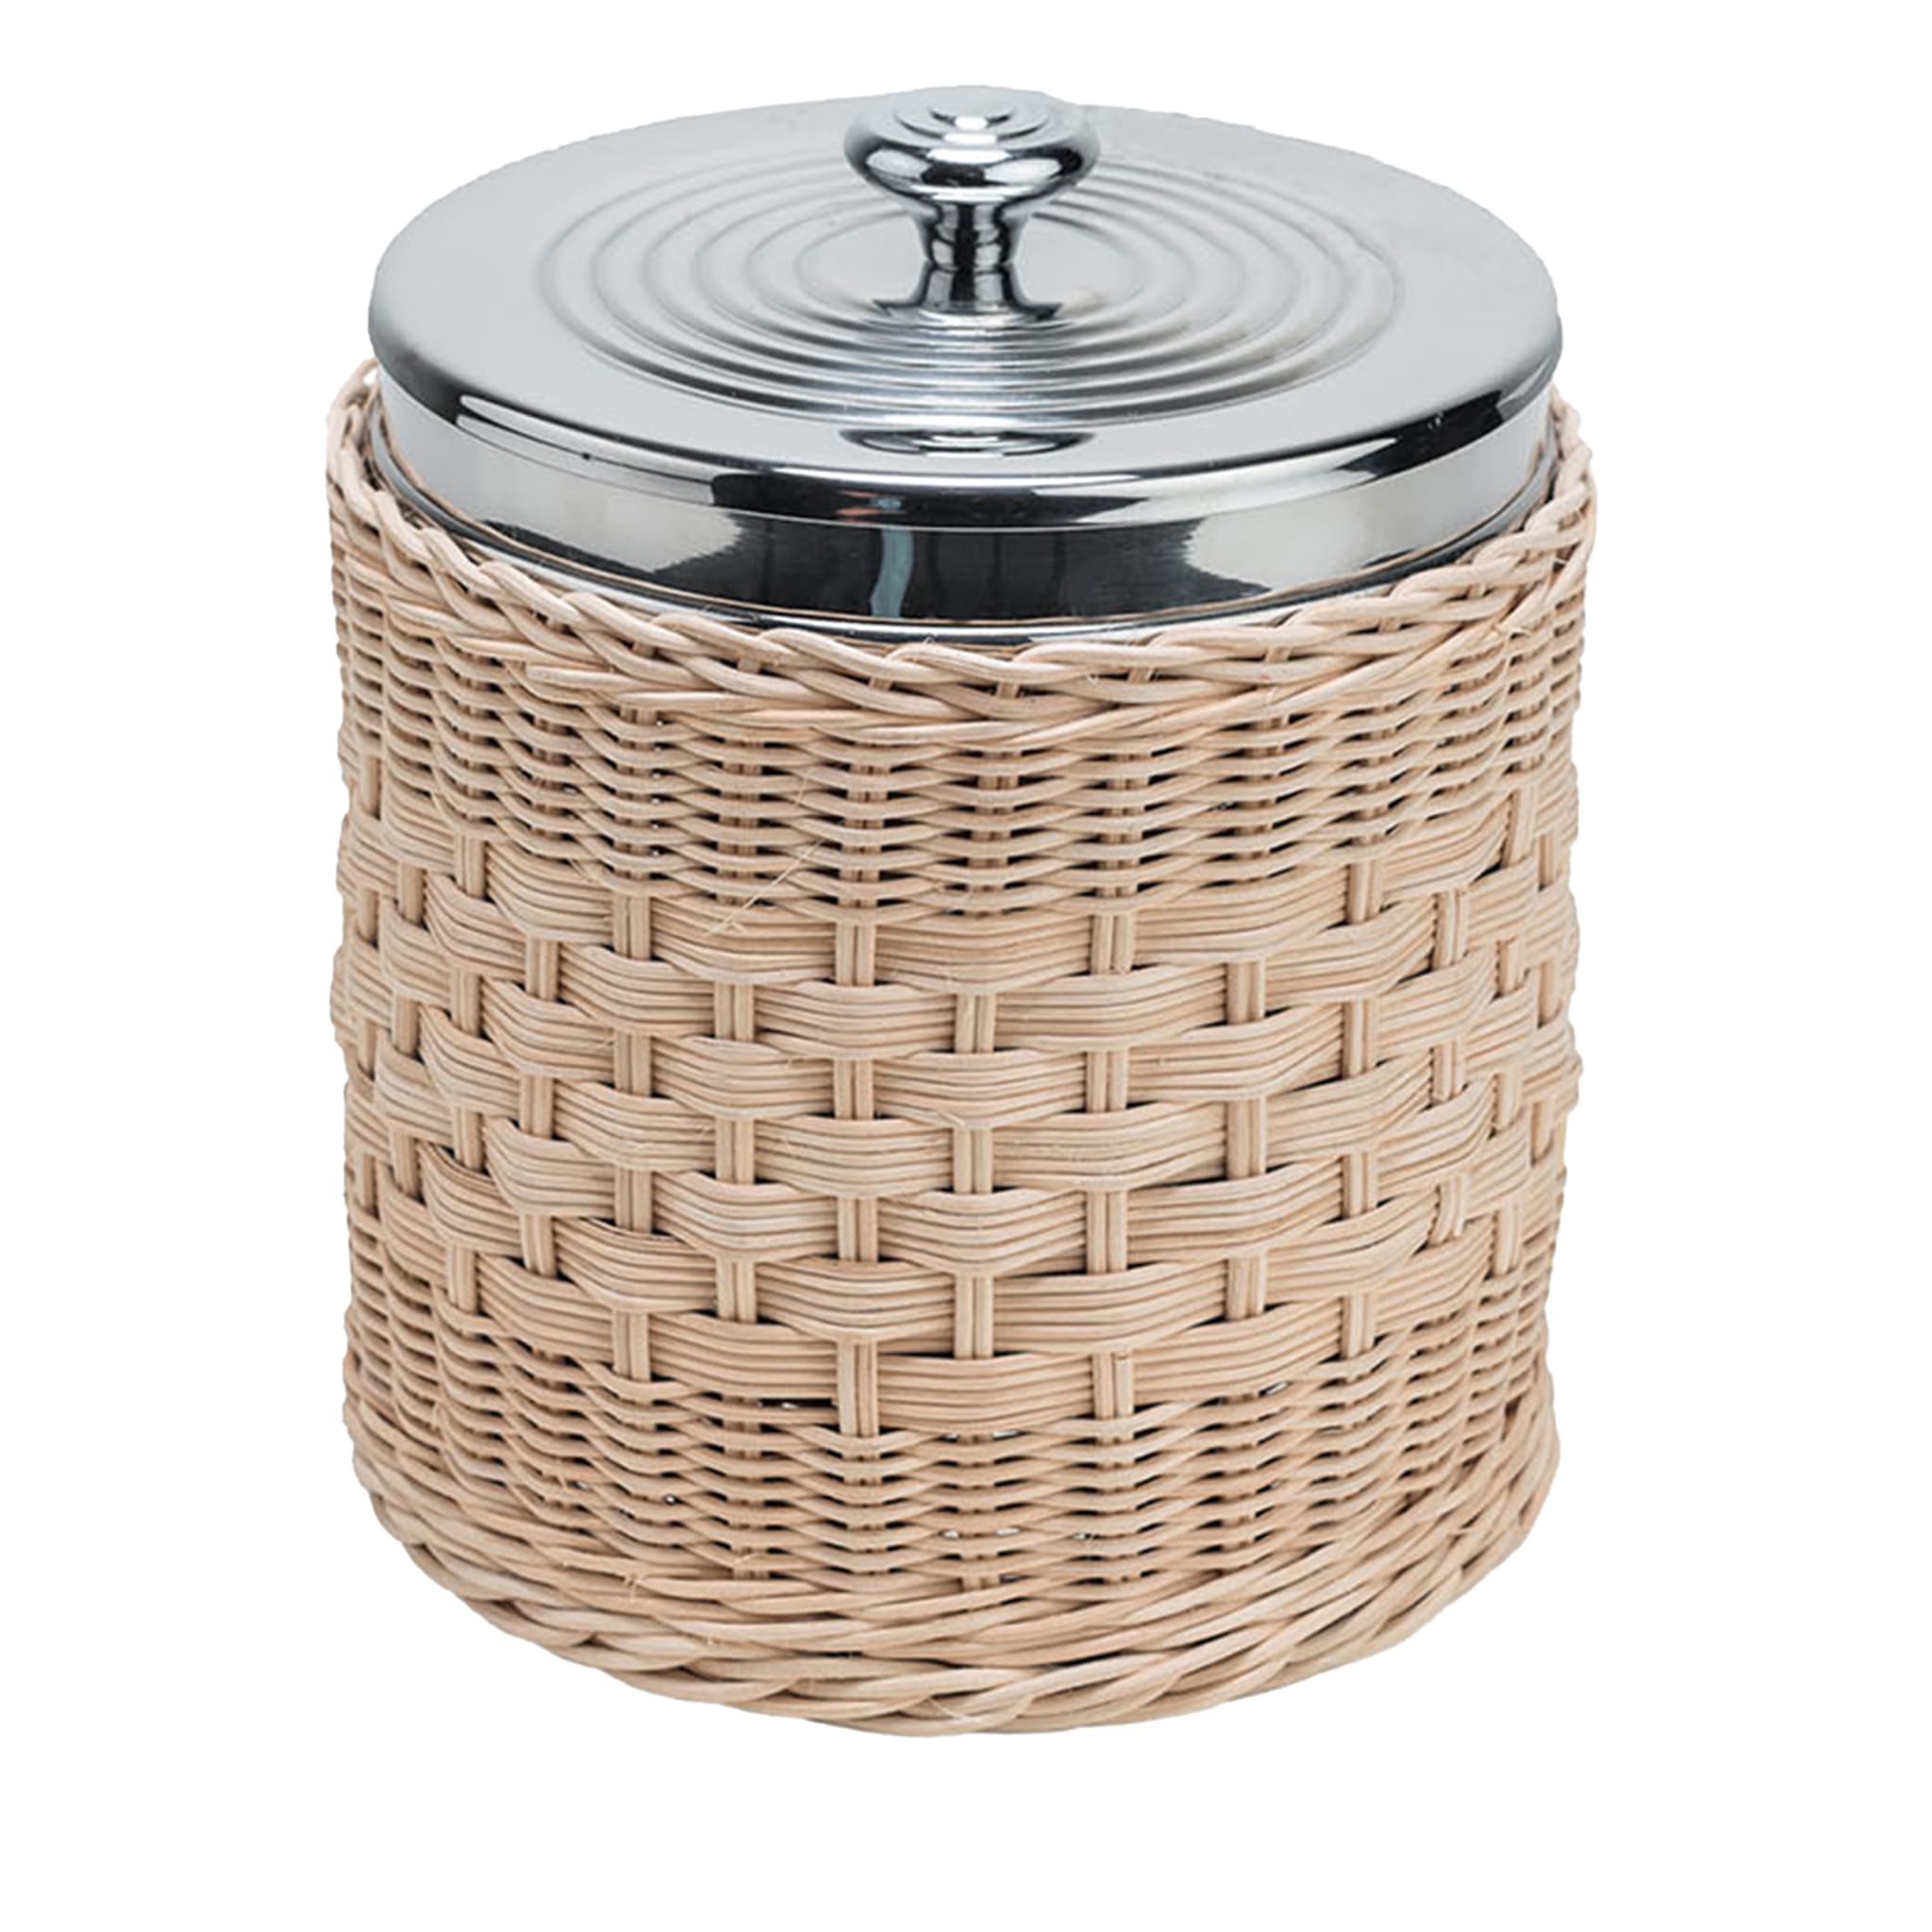 Iris Wicker Basket with Stainless Steel Ice Container - Main view